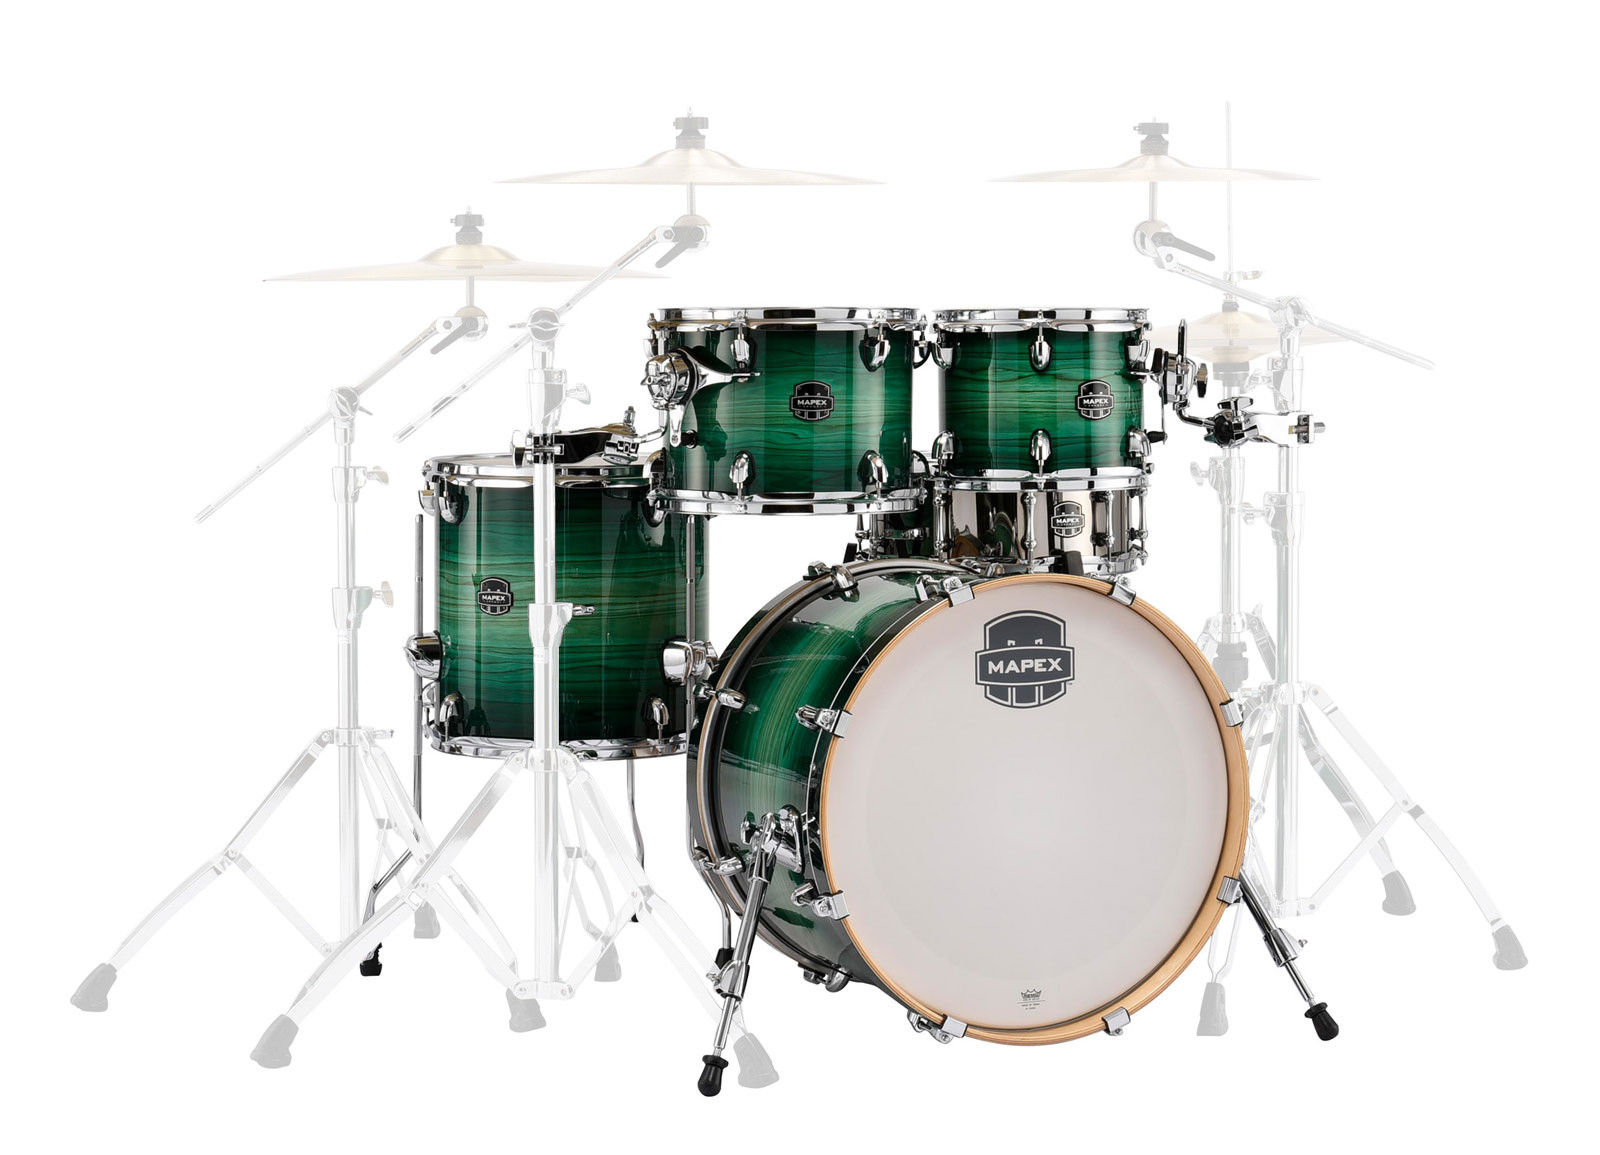 MAPEX AR504S-DW - ARMORY 5 SHELLS FUSION 20 VERTE EMERALD BURST (WITHOUT HARDWARE)